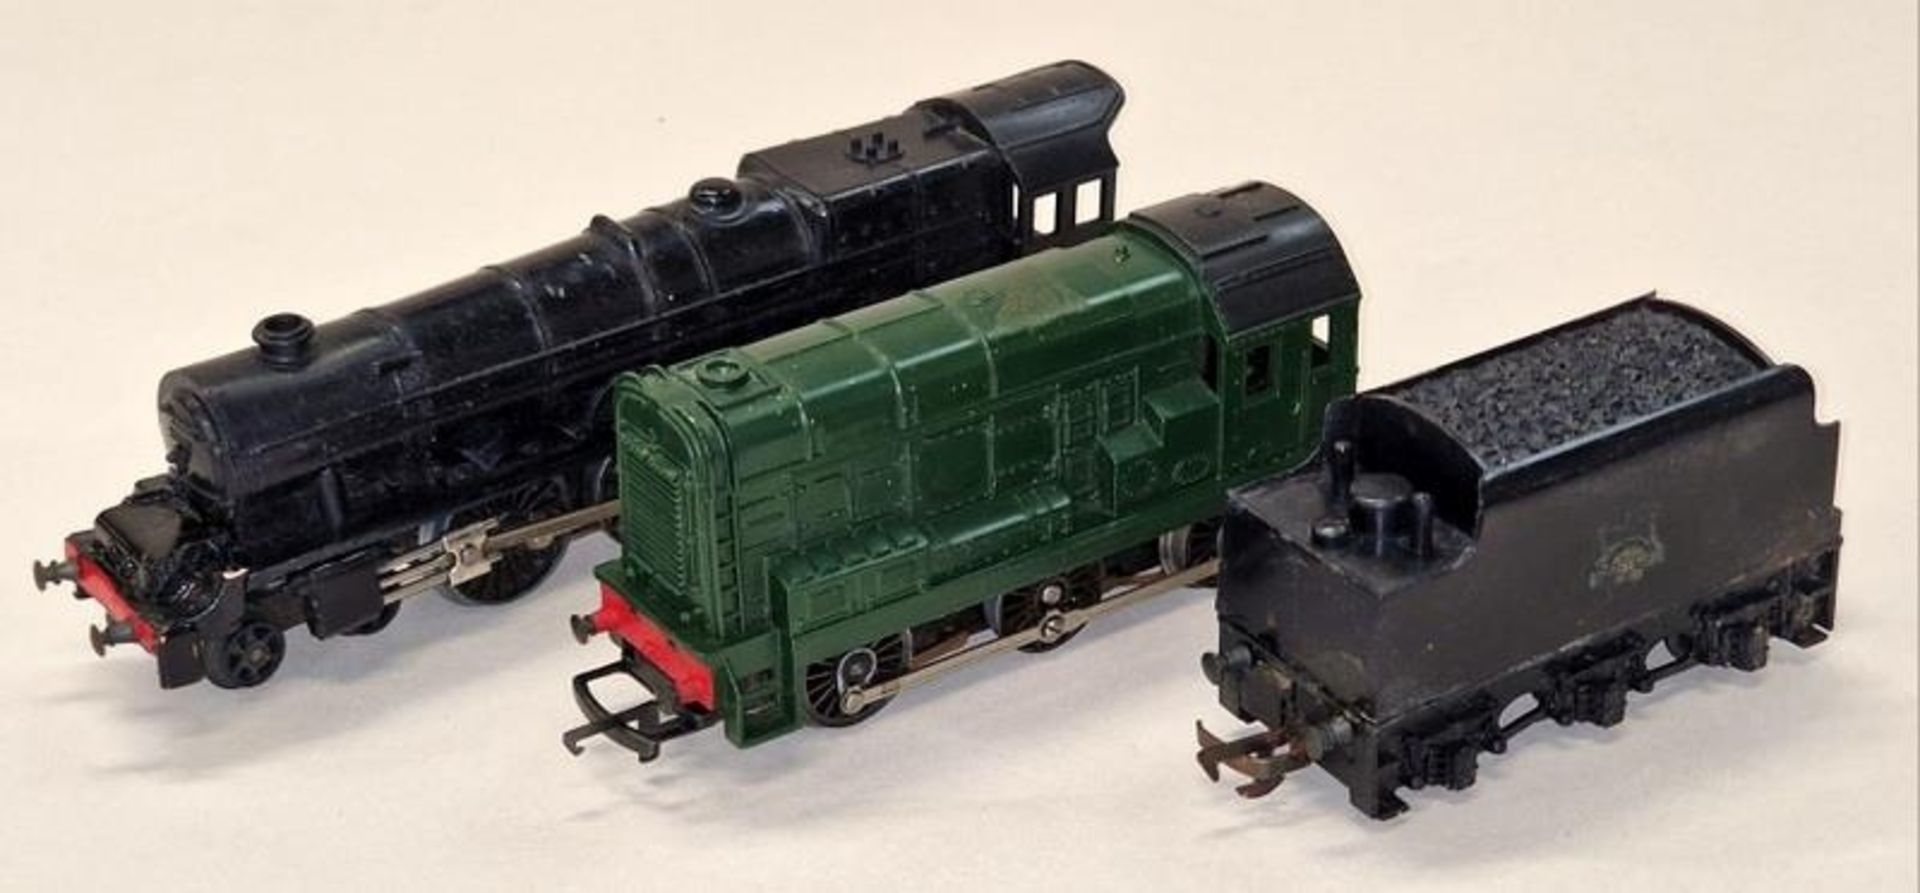 Two Triang locomotives to include 4-6-2 Princess Elizabeth 46201 with tender and a diesel shunter.